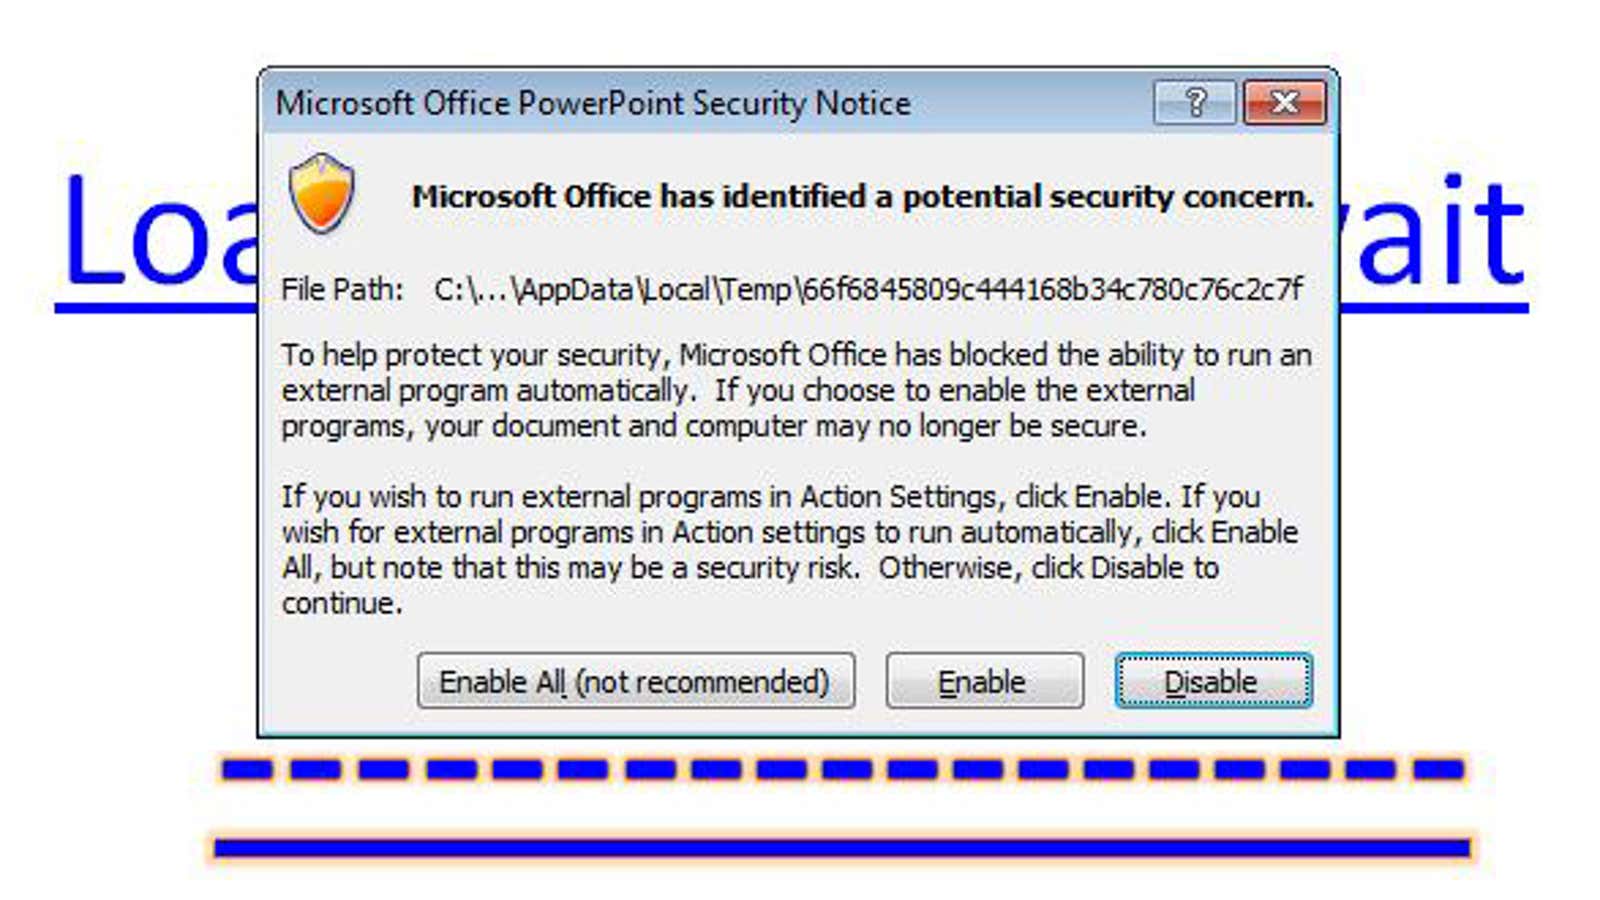 A PowerPoint document infected with malware.